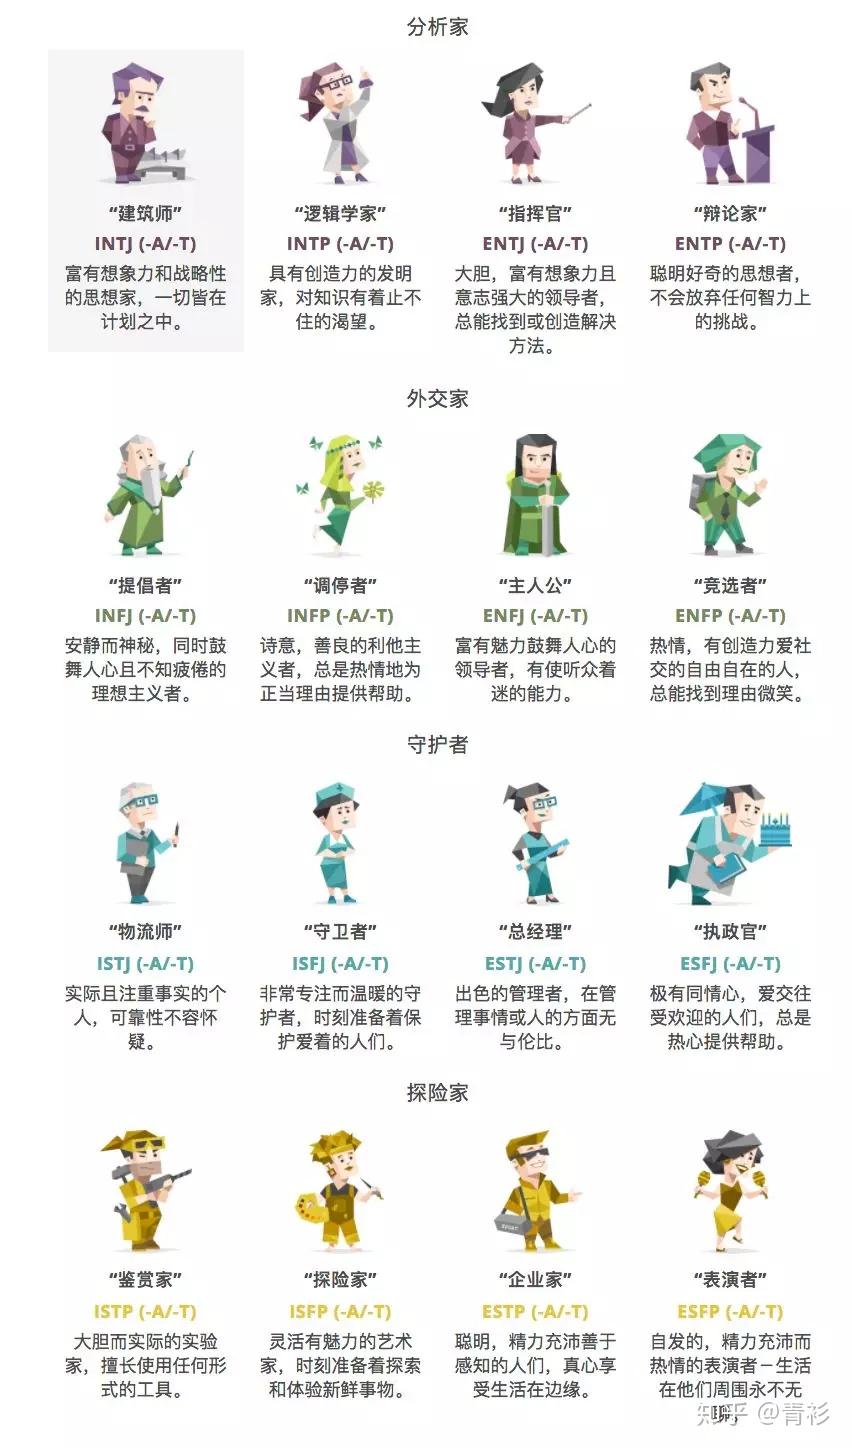 Infp 人格